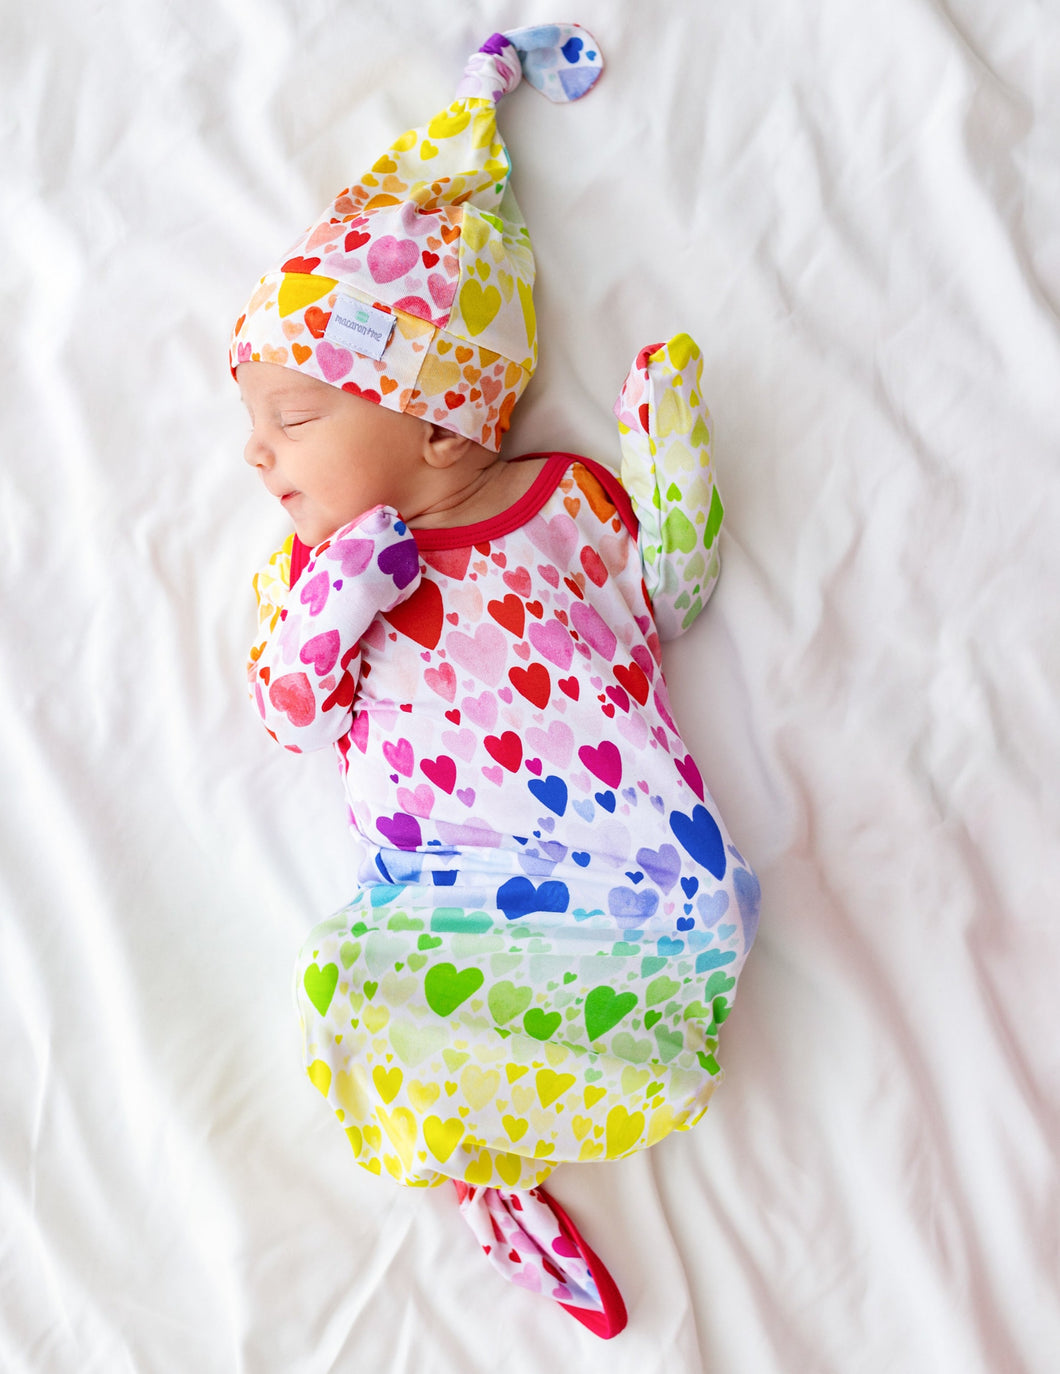 Rainbow Hearts Knotted Gown